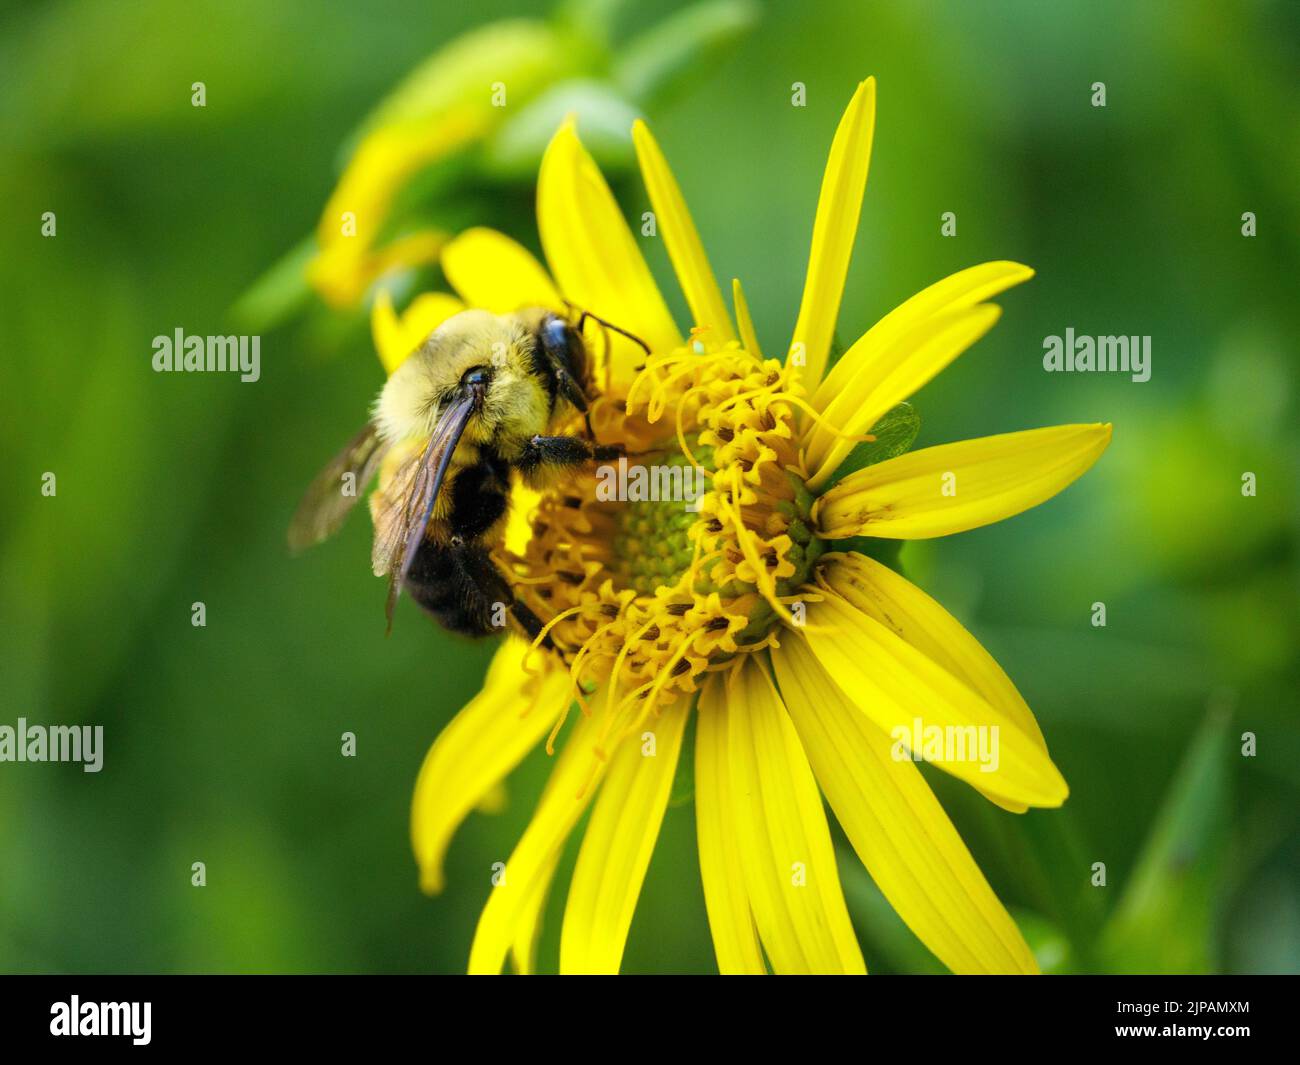 Brown-belted bumble bee (Bombus griseocollis) on cup plant flower. Stock Photo